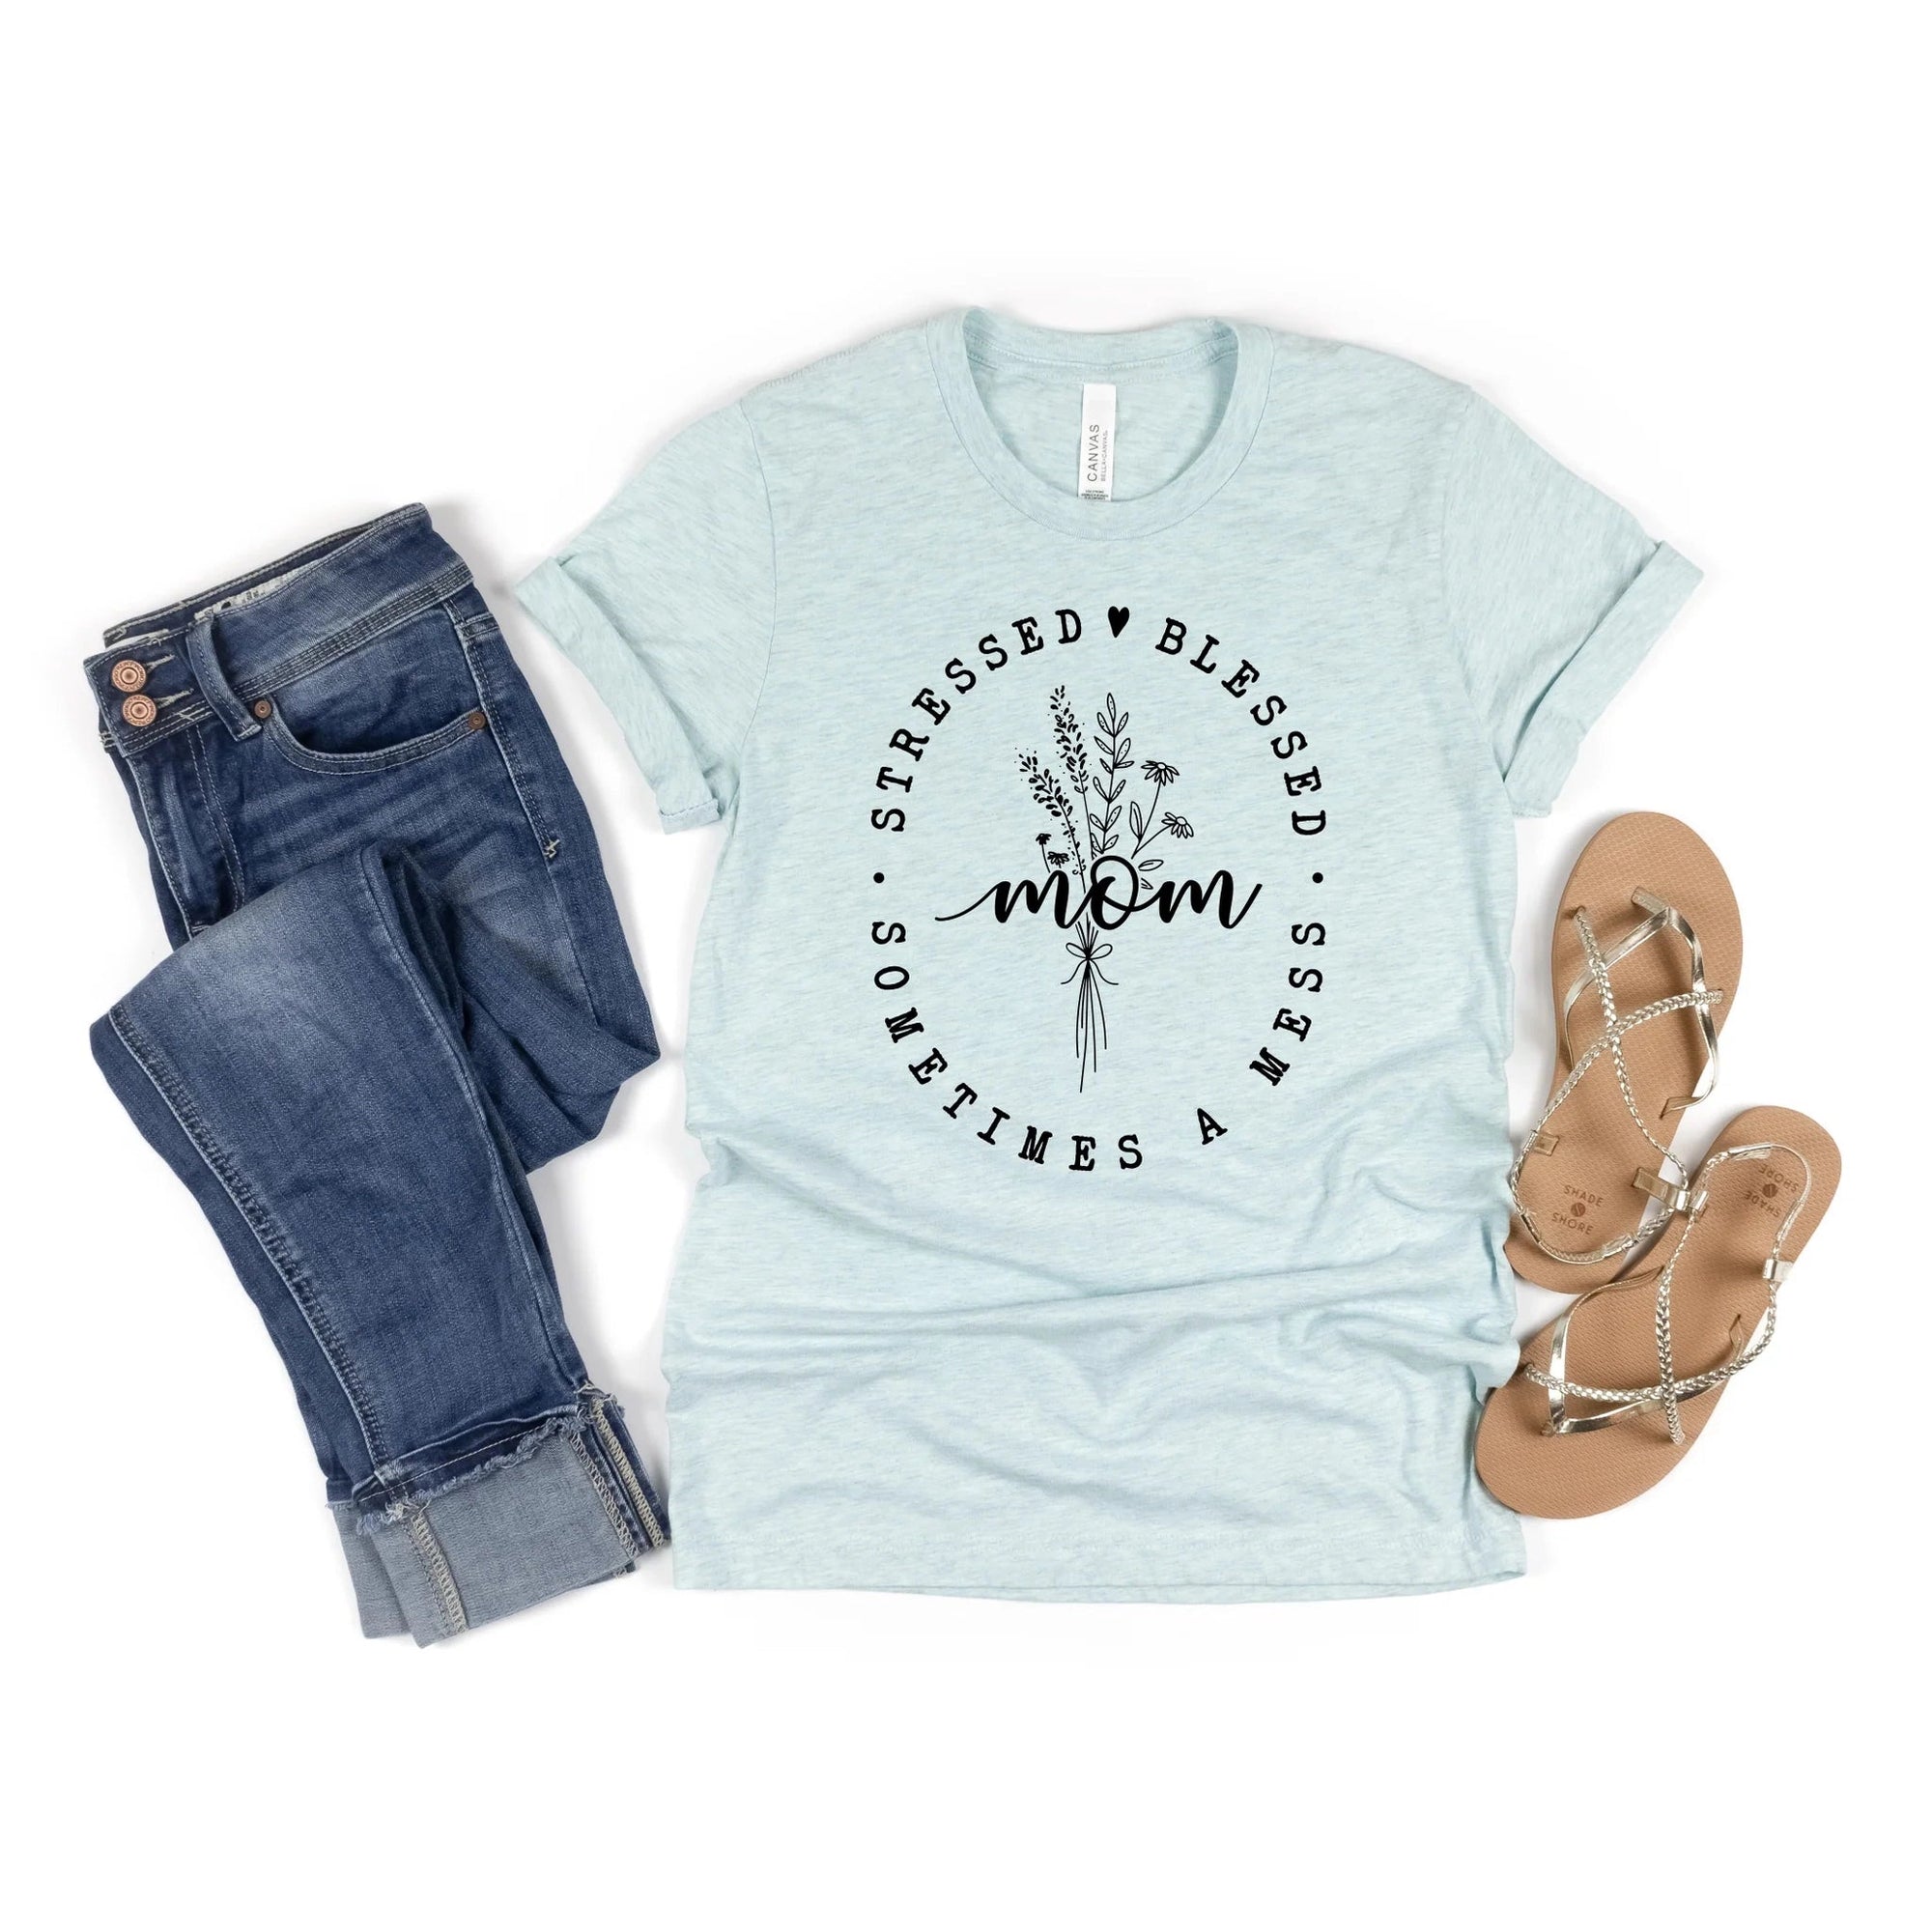 Stressed Blessed Sometimes a Mess Graphic tee